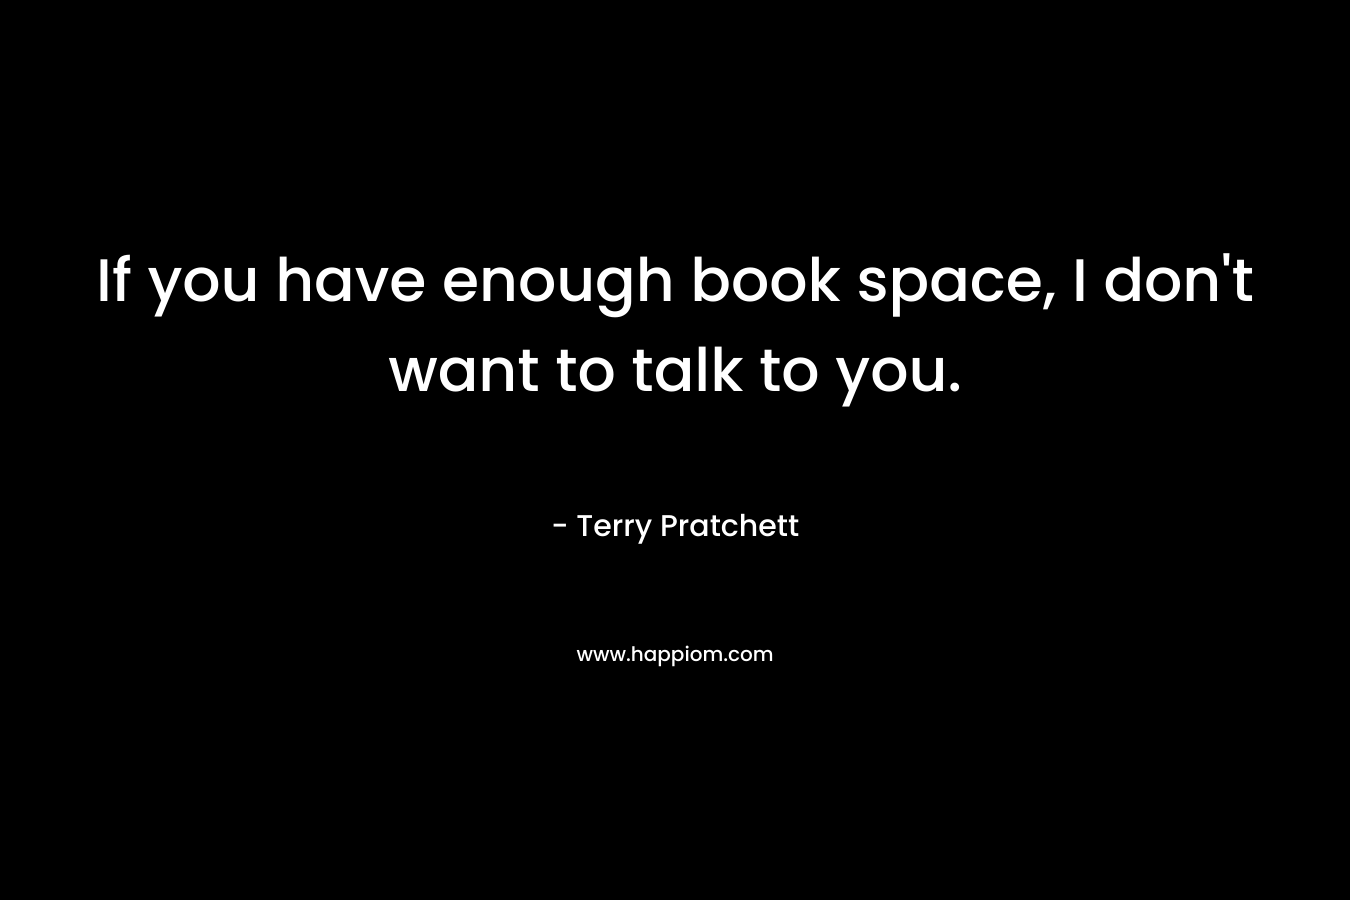 If you have enough book space, I don't want to talk to you.